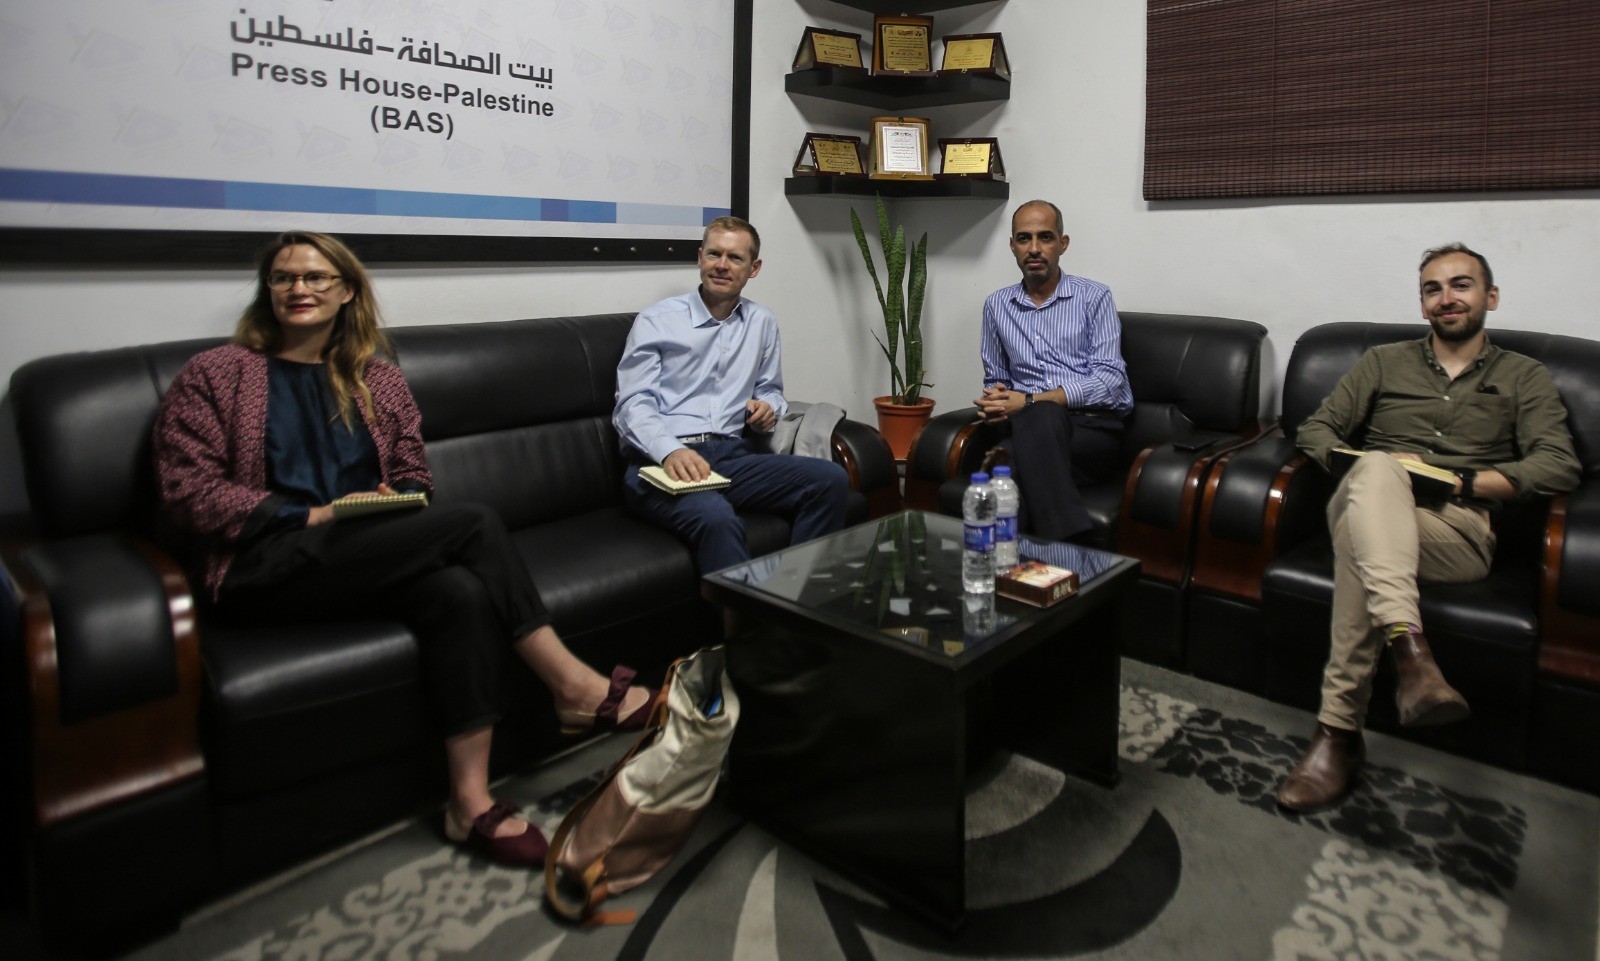 The Irish Ambassador and his Deputy in the Palestinian territories visited Press House